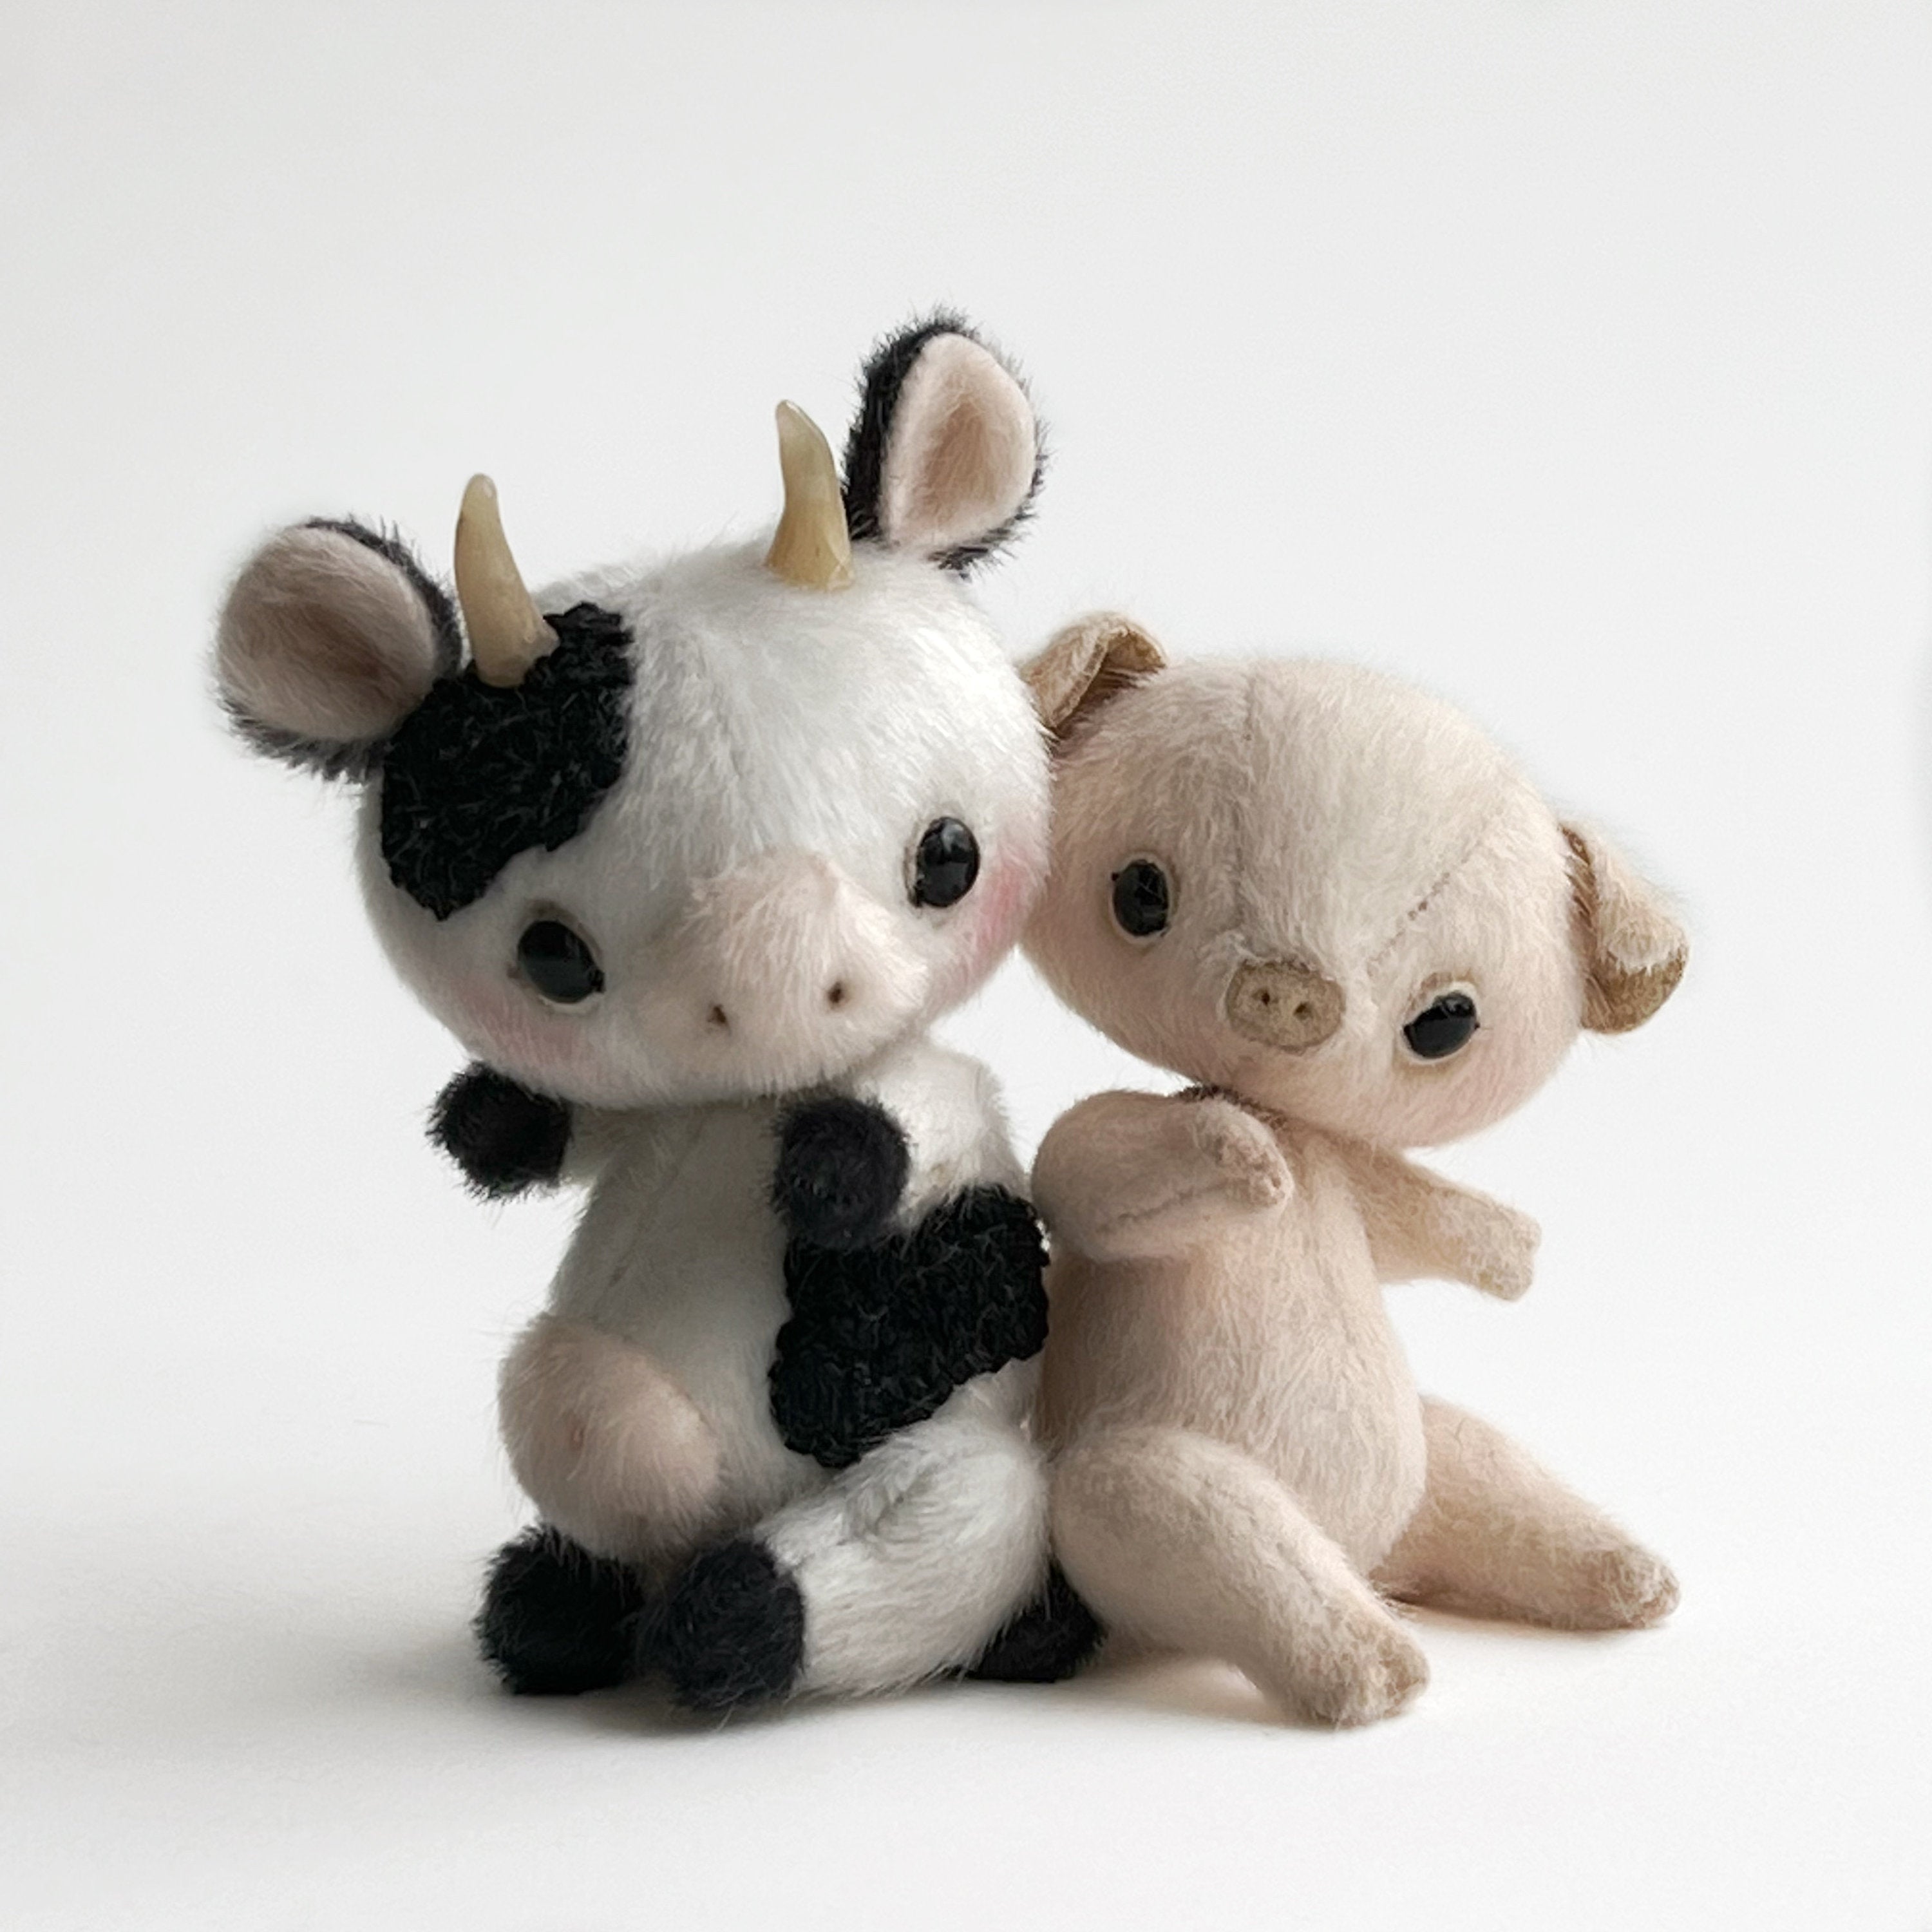 Cow - PDF sewing pattern, artist pattern, stuffed toy tutorials, soft animal, soft toy diy craft kit for adults gift by TSminibears